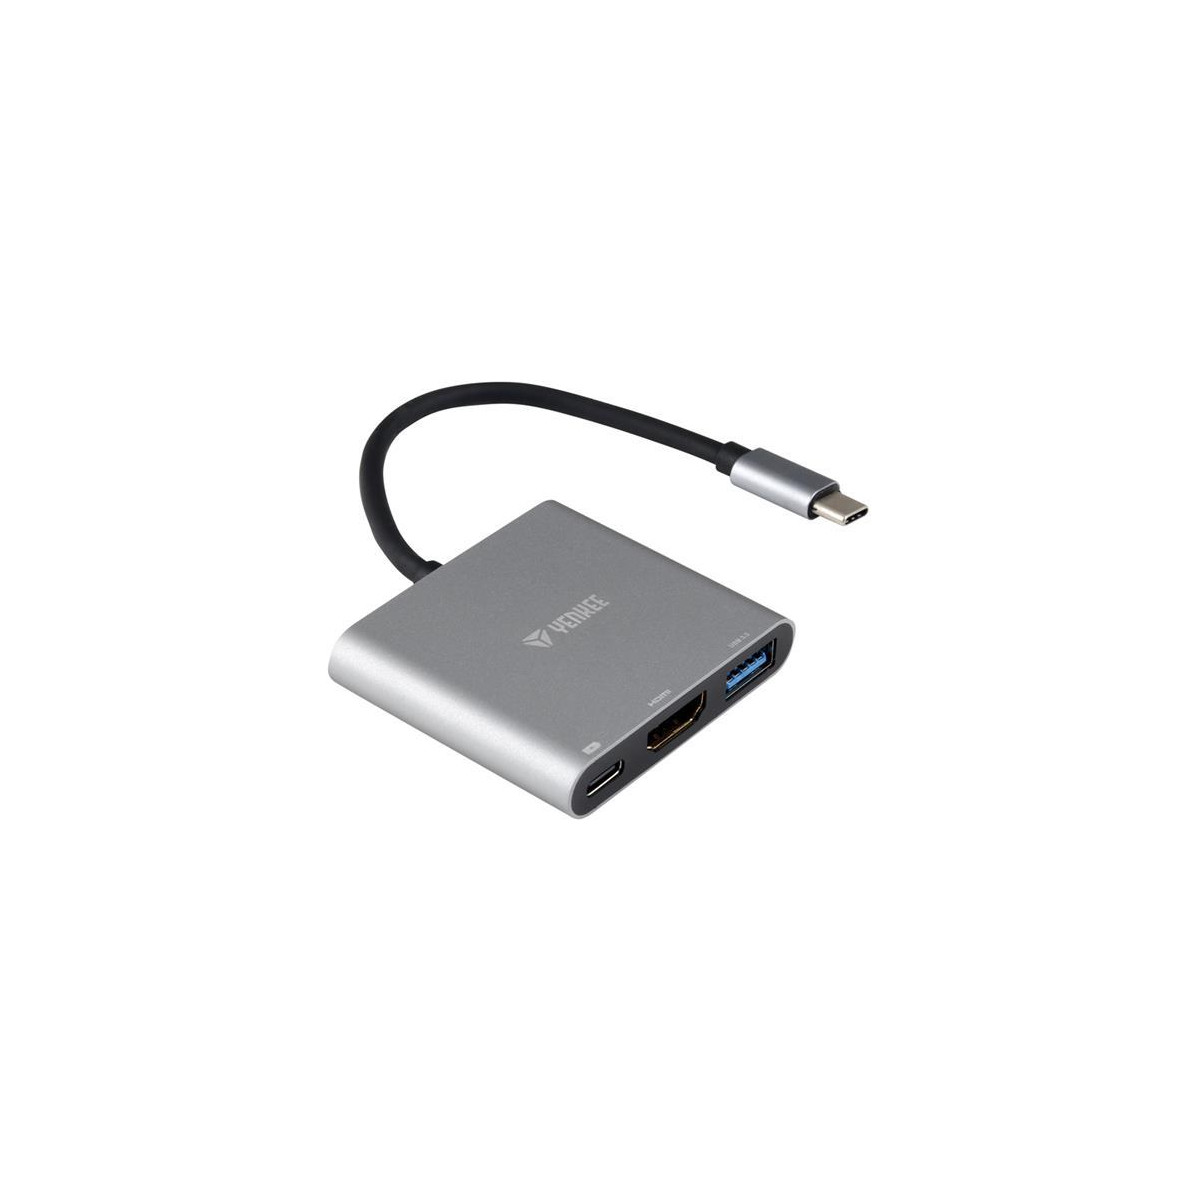 More about Adaptér YENKEE YTC 031 USB C na HDMI, USB,C,A